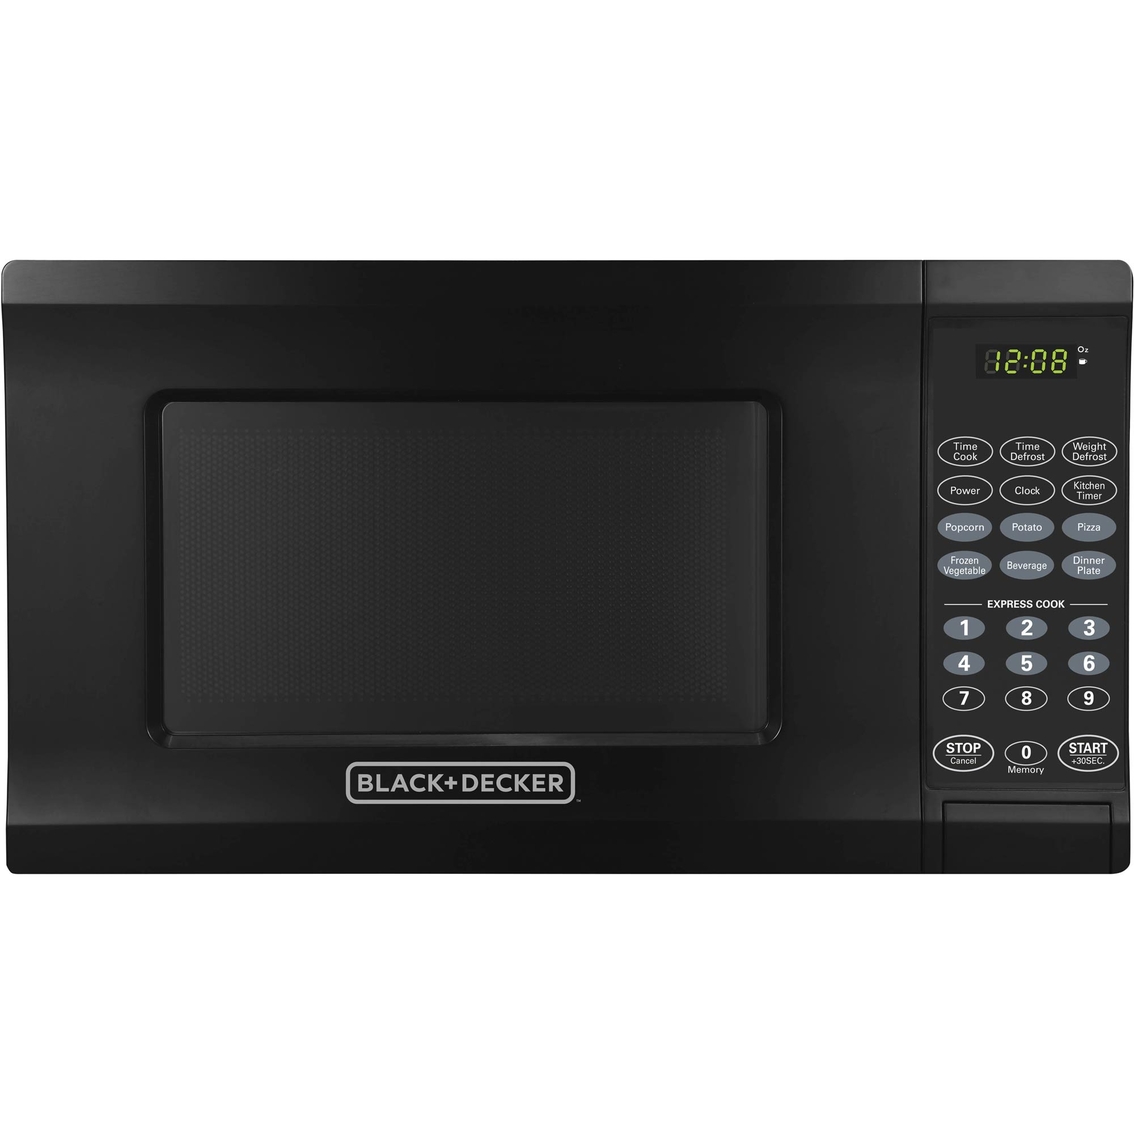 Black & Decker EM720CPY 700W - 0.7 Cubic Feet (stainless silver color)  Microwave